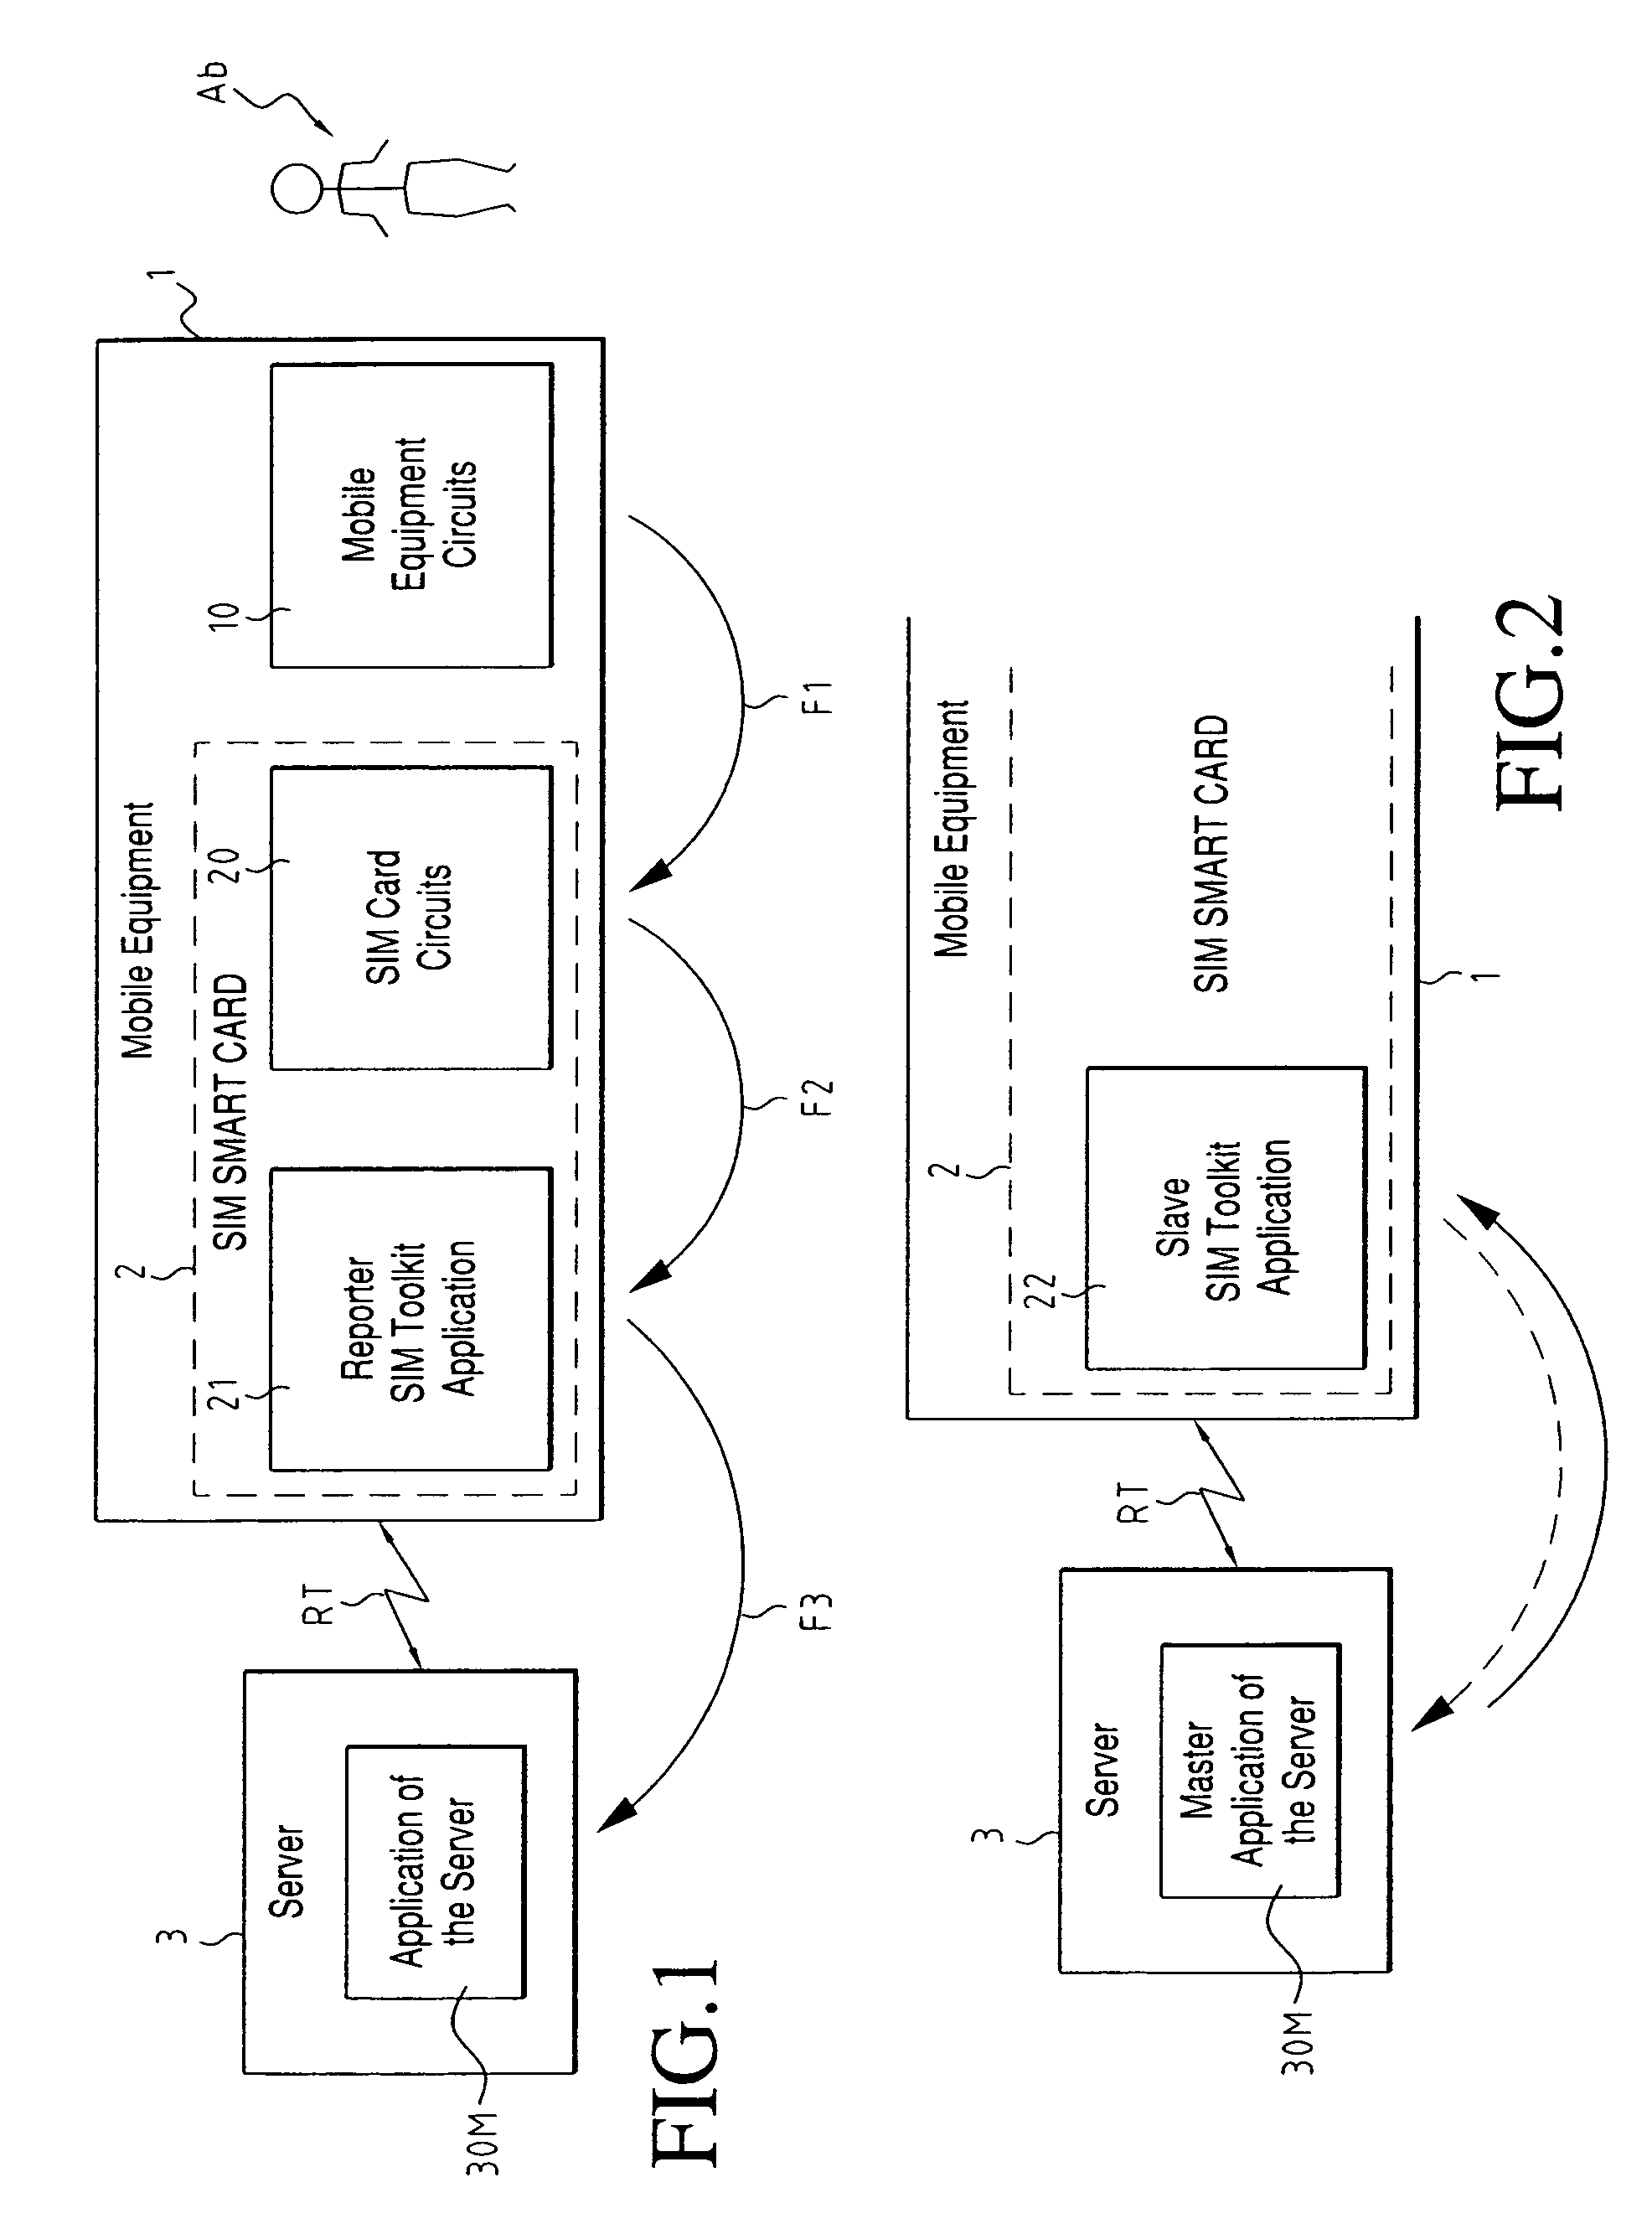 Method for processing and transmitting data on a mobile telephone network and microchip onboard system